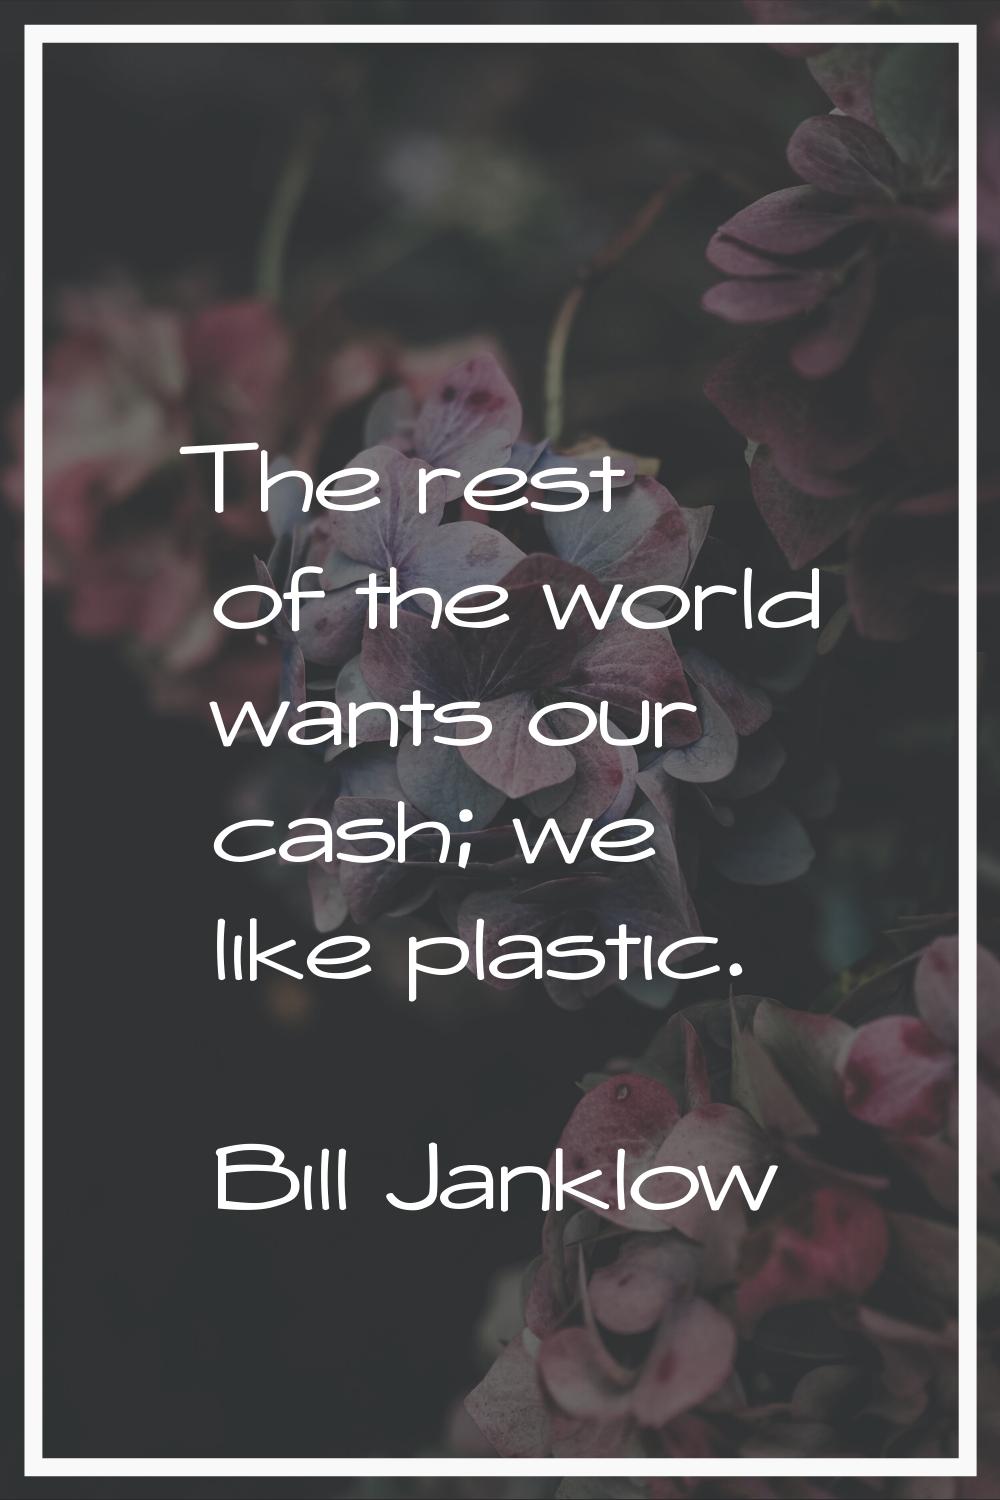 The rest of the world wants our cash; we like plastic.